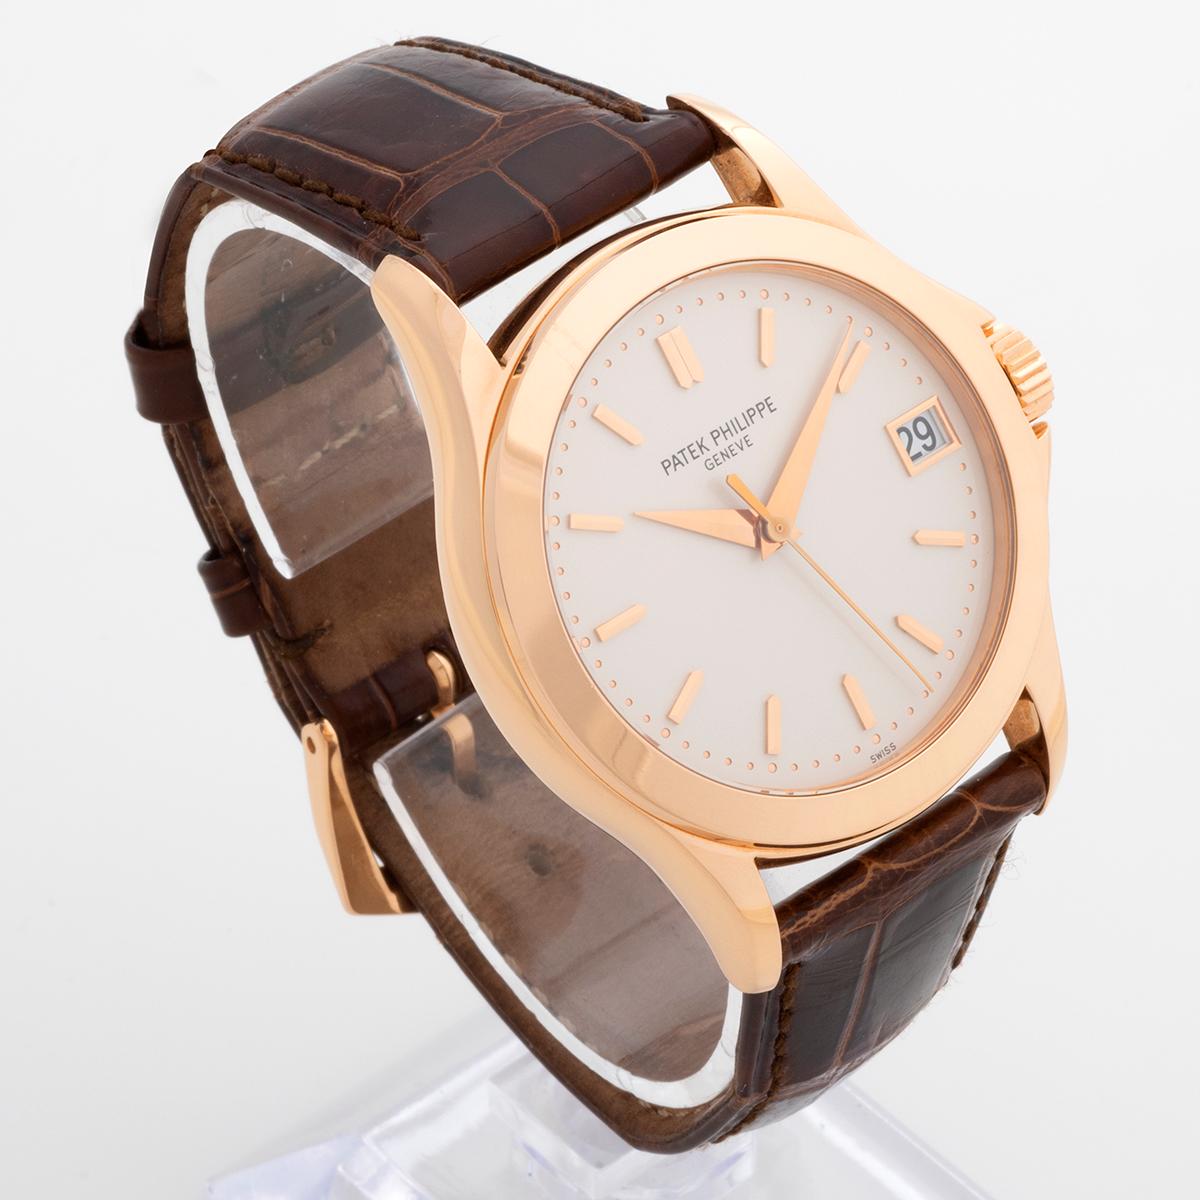 Our classic Patek Philippe Calatrava, reference 5107 R (with 18k rose gold case and tang buckle) with date is presented in outstanding condition and comes in original and unpolished condition. Reference 5107 was in the Patek Philippe Calatrava range